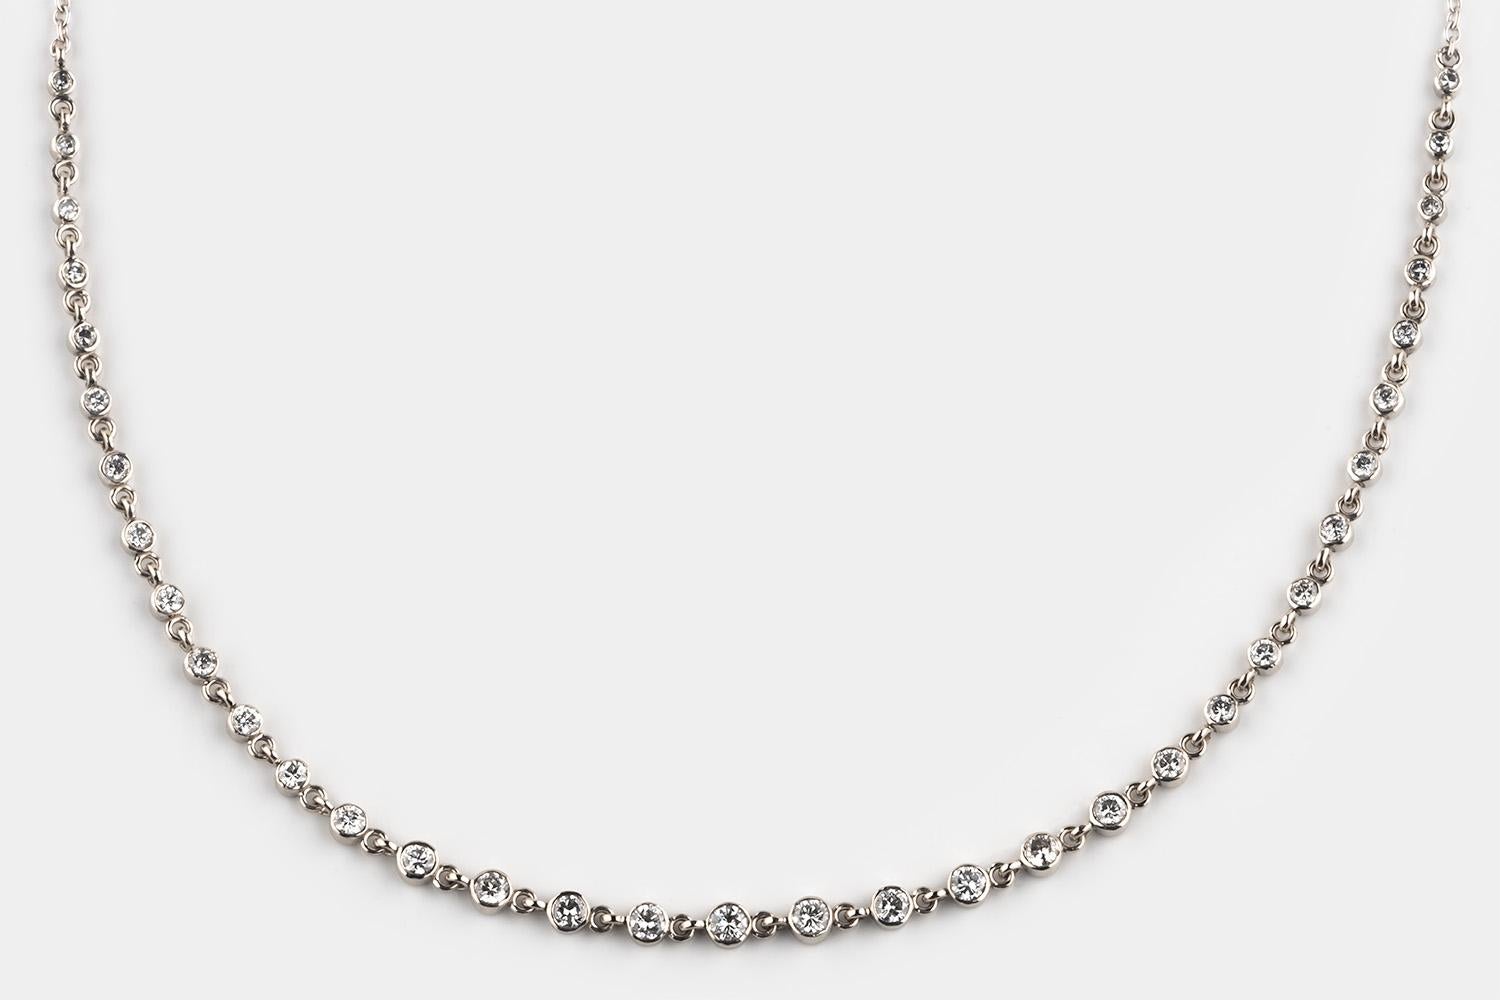 A bezel set sparkly strand of reclaimed diamonds set in solid 14-karat white gold that simply goes with everything.

Designed to fit near your clavicle, the effect is elegant and it’s the kind of piece you never have to take off.

The diamonds were